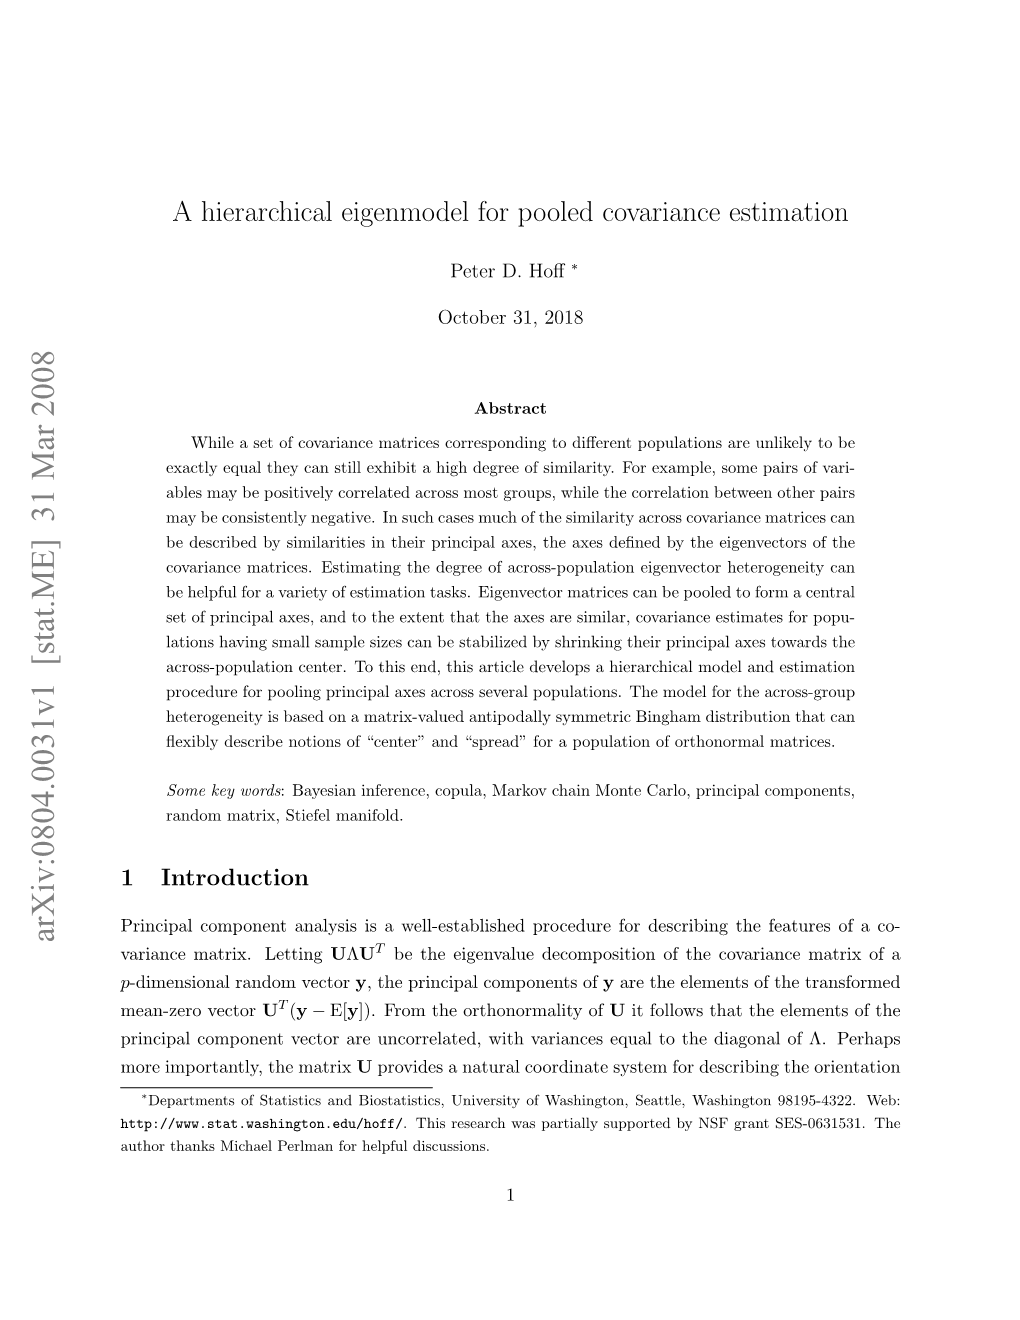 A Hierarchical Eigenmodel for Pooled Covariance Estimation